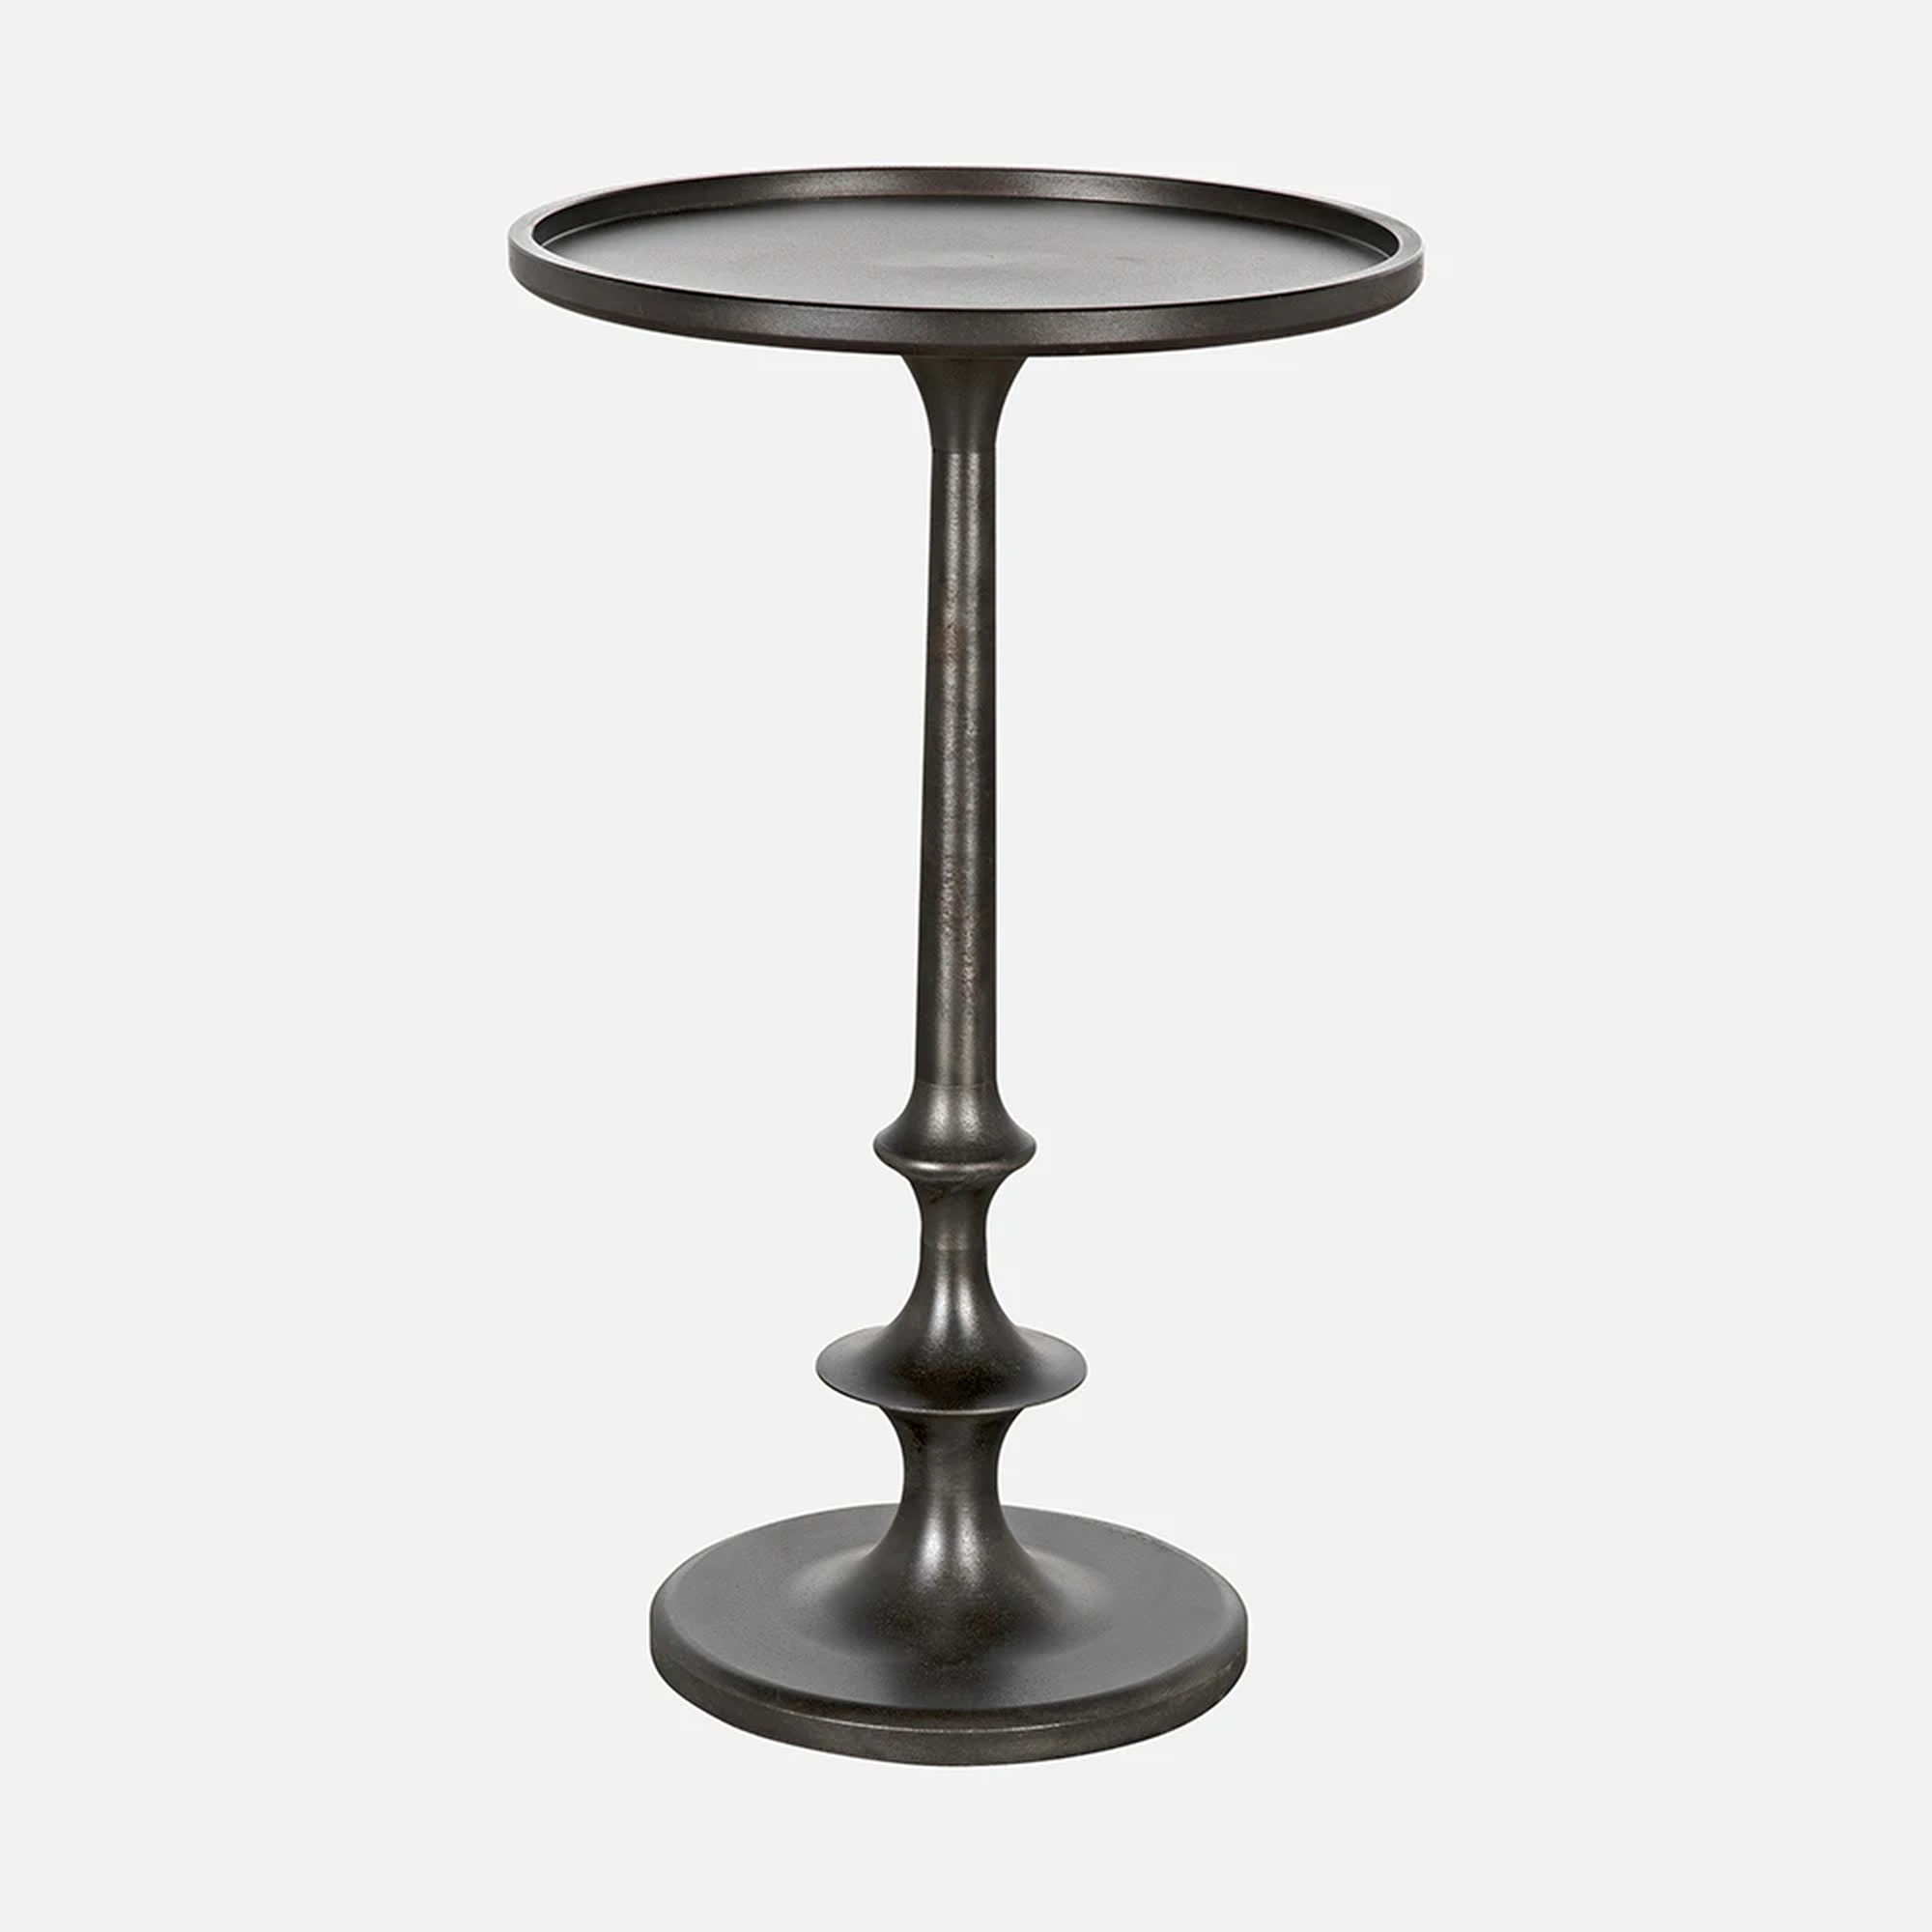 a metal table with a metal base on a white background